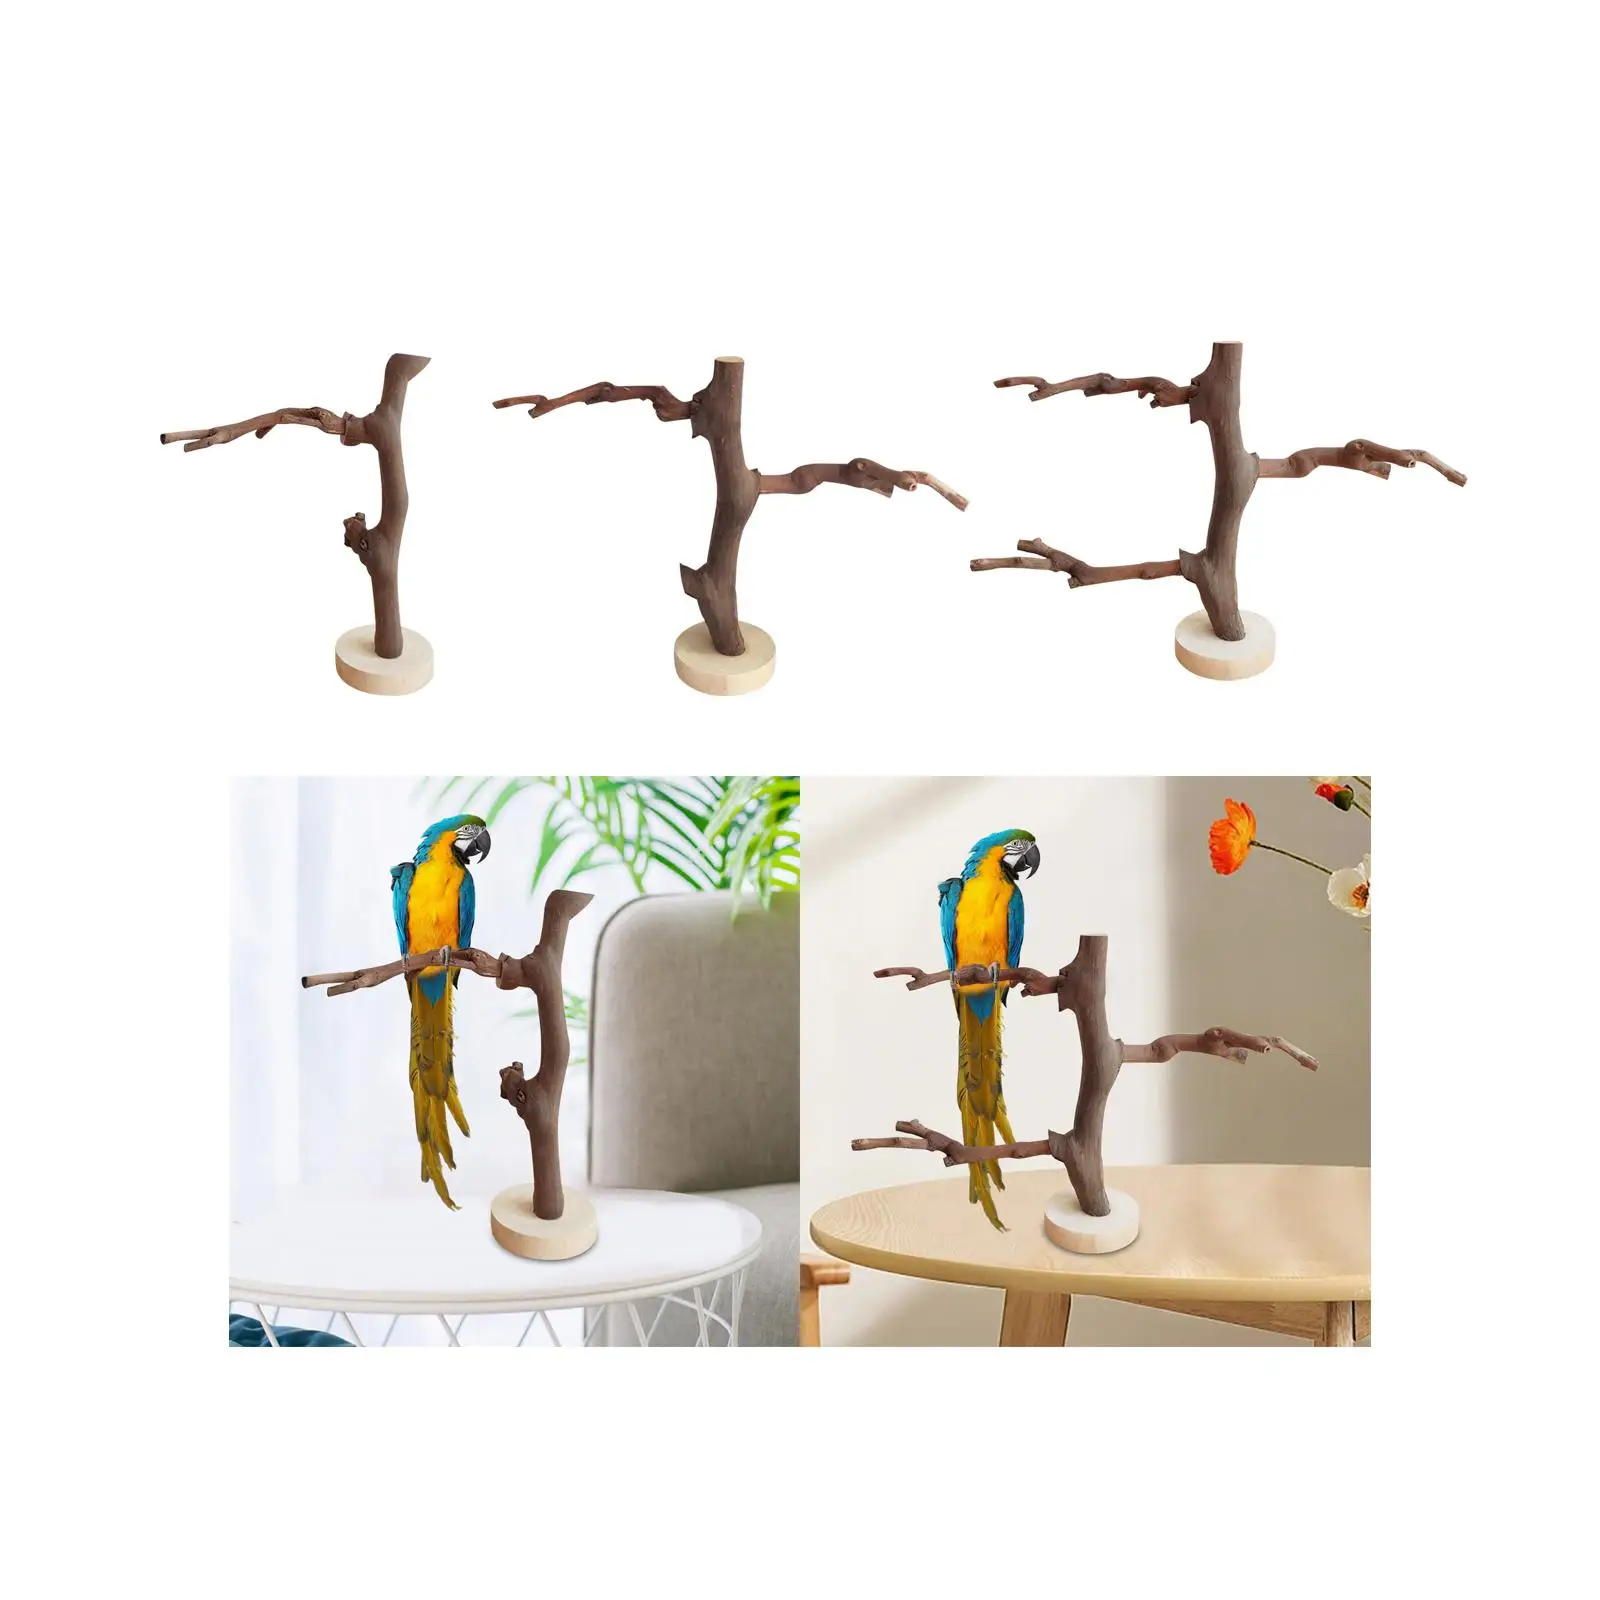 Parrot Stand Birdcage Tabletop Multifunction Bird Perches Sturdy Tree Branches for Pet Parrots Cockatiels Parakeets Bite Toys